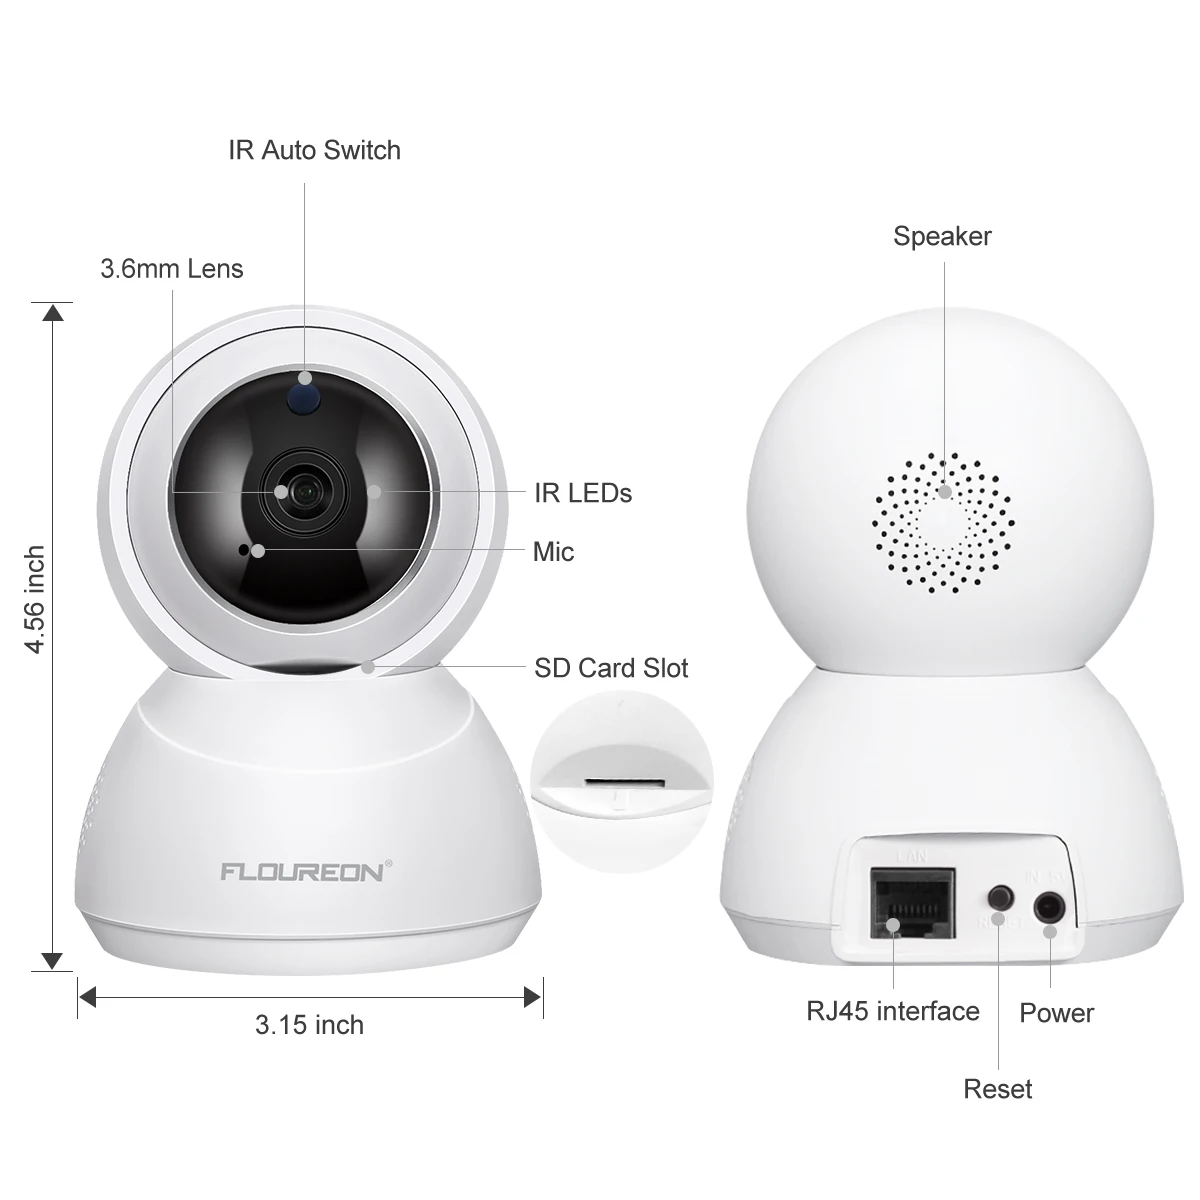 Black FLOUREON WiFi IP Security Camera Wireless 1080P HD Dome Camera for Pet/Baby/Elder Home Surveillance with Smart Tracking,940nm Invisible Night Vision,2-Way Audio Pan/Tilt/Zoom